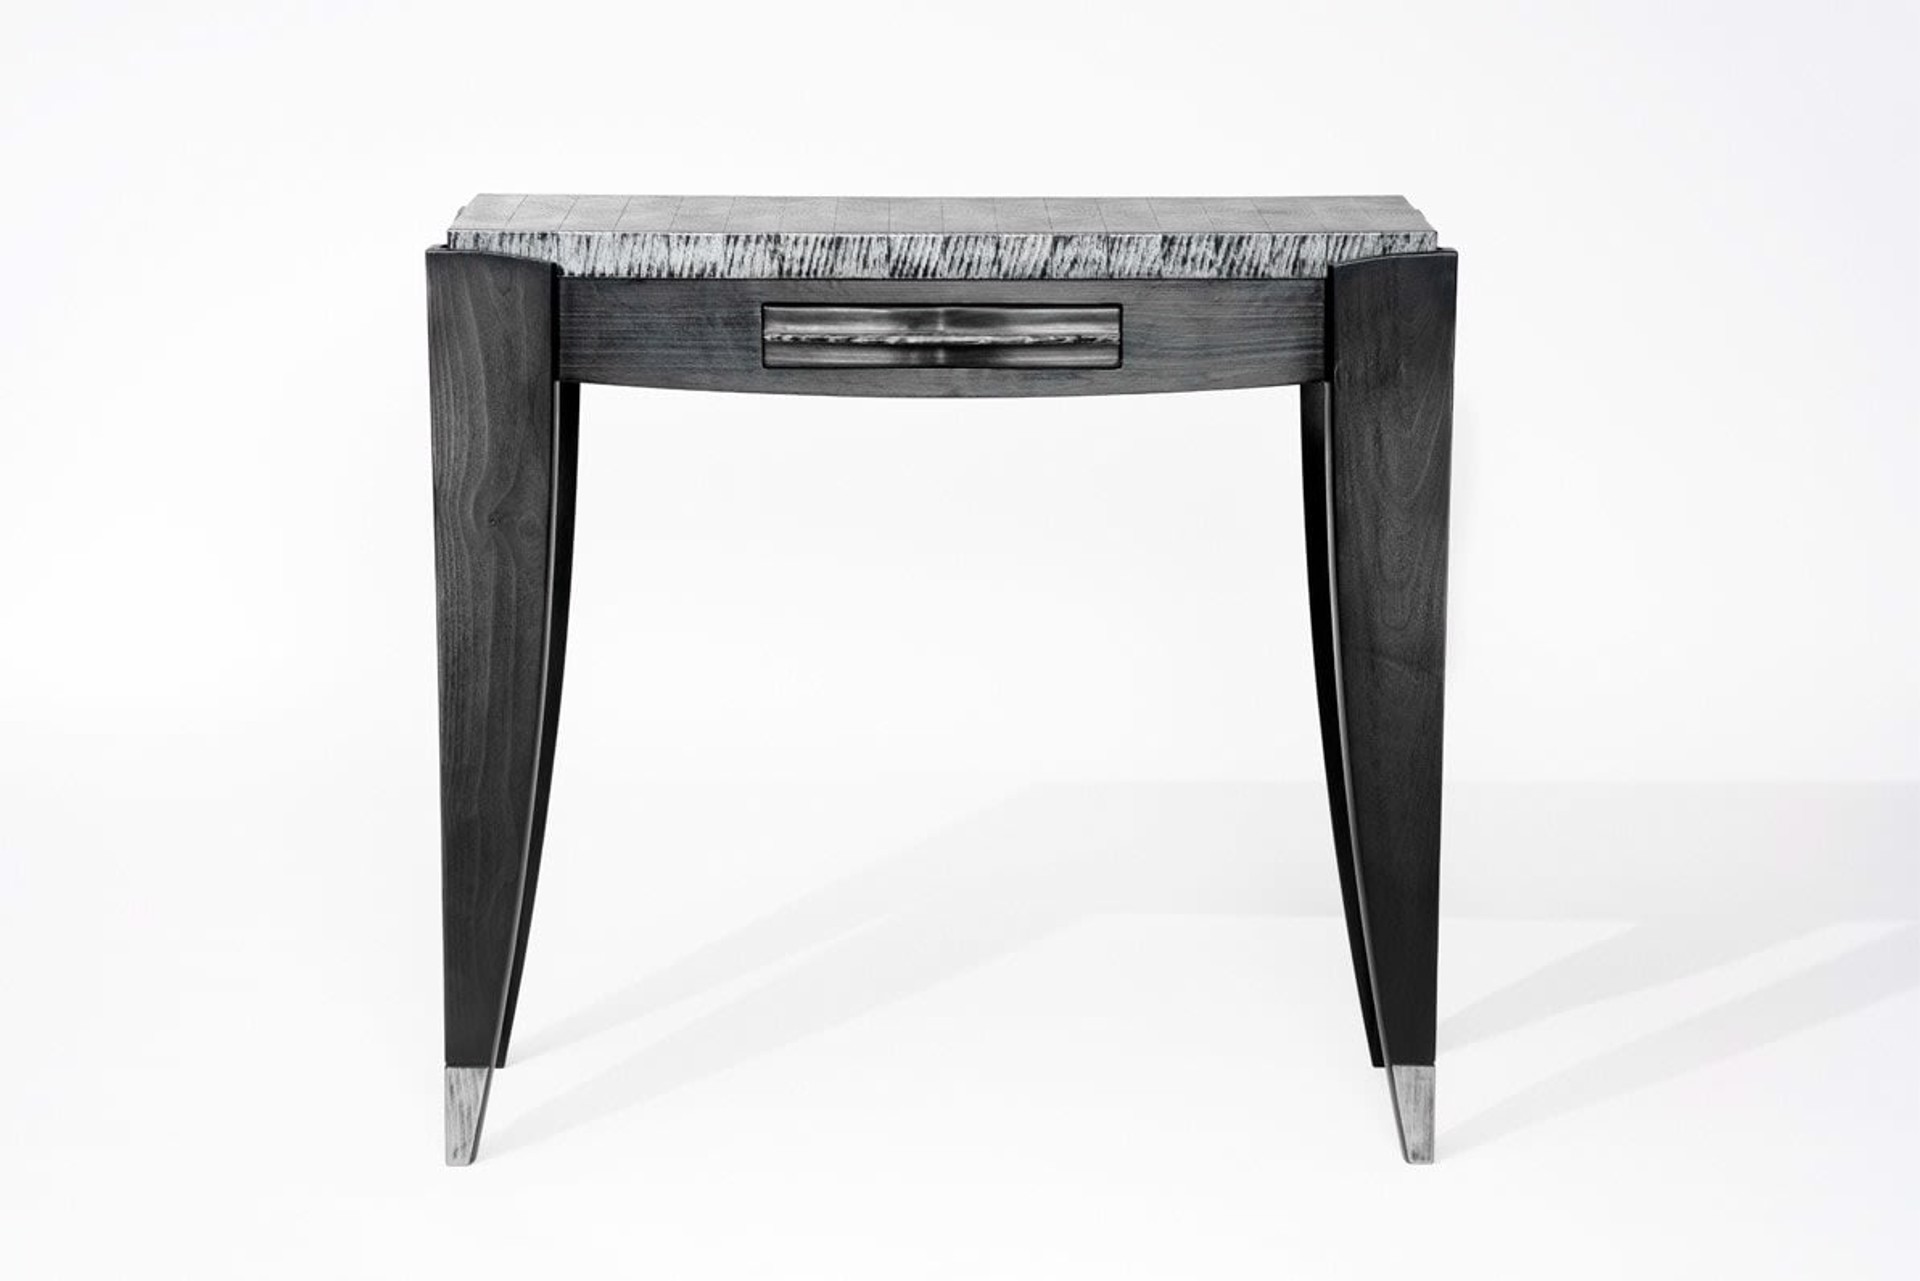 SILVER VIGNETTE CONSOLE TABLE WITH DRAWER by Doug Jones